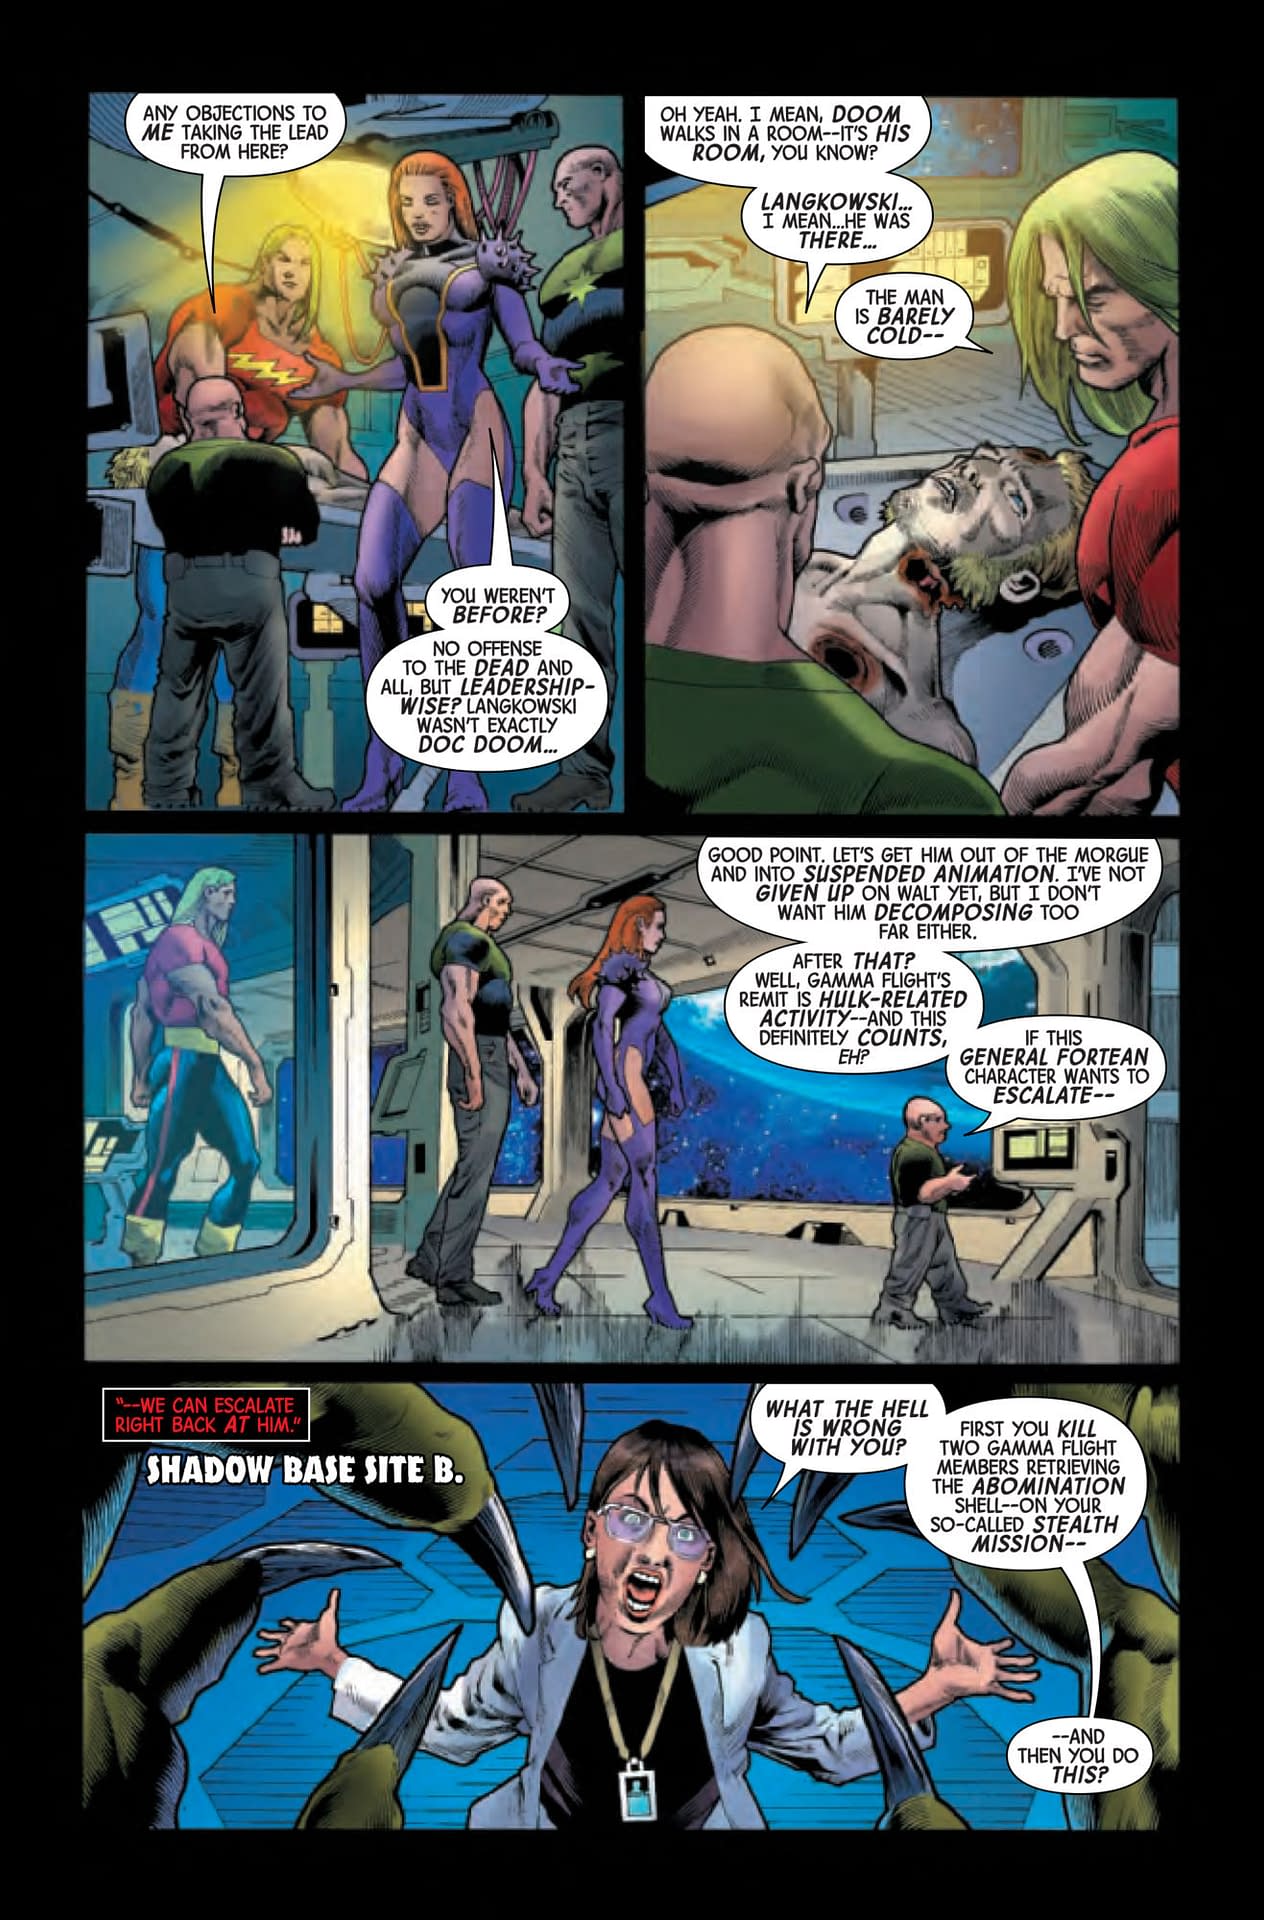 Deleted Scenes from the Democratic Debates in Immortal Hulk #22 [Preview]